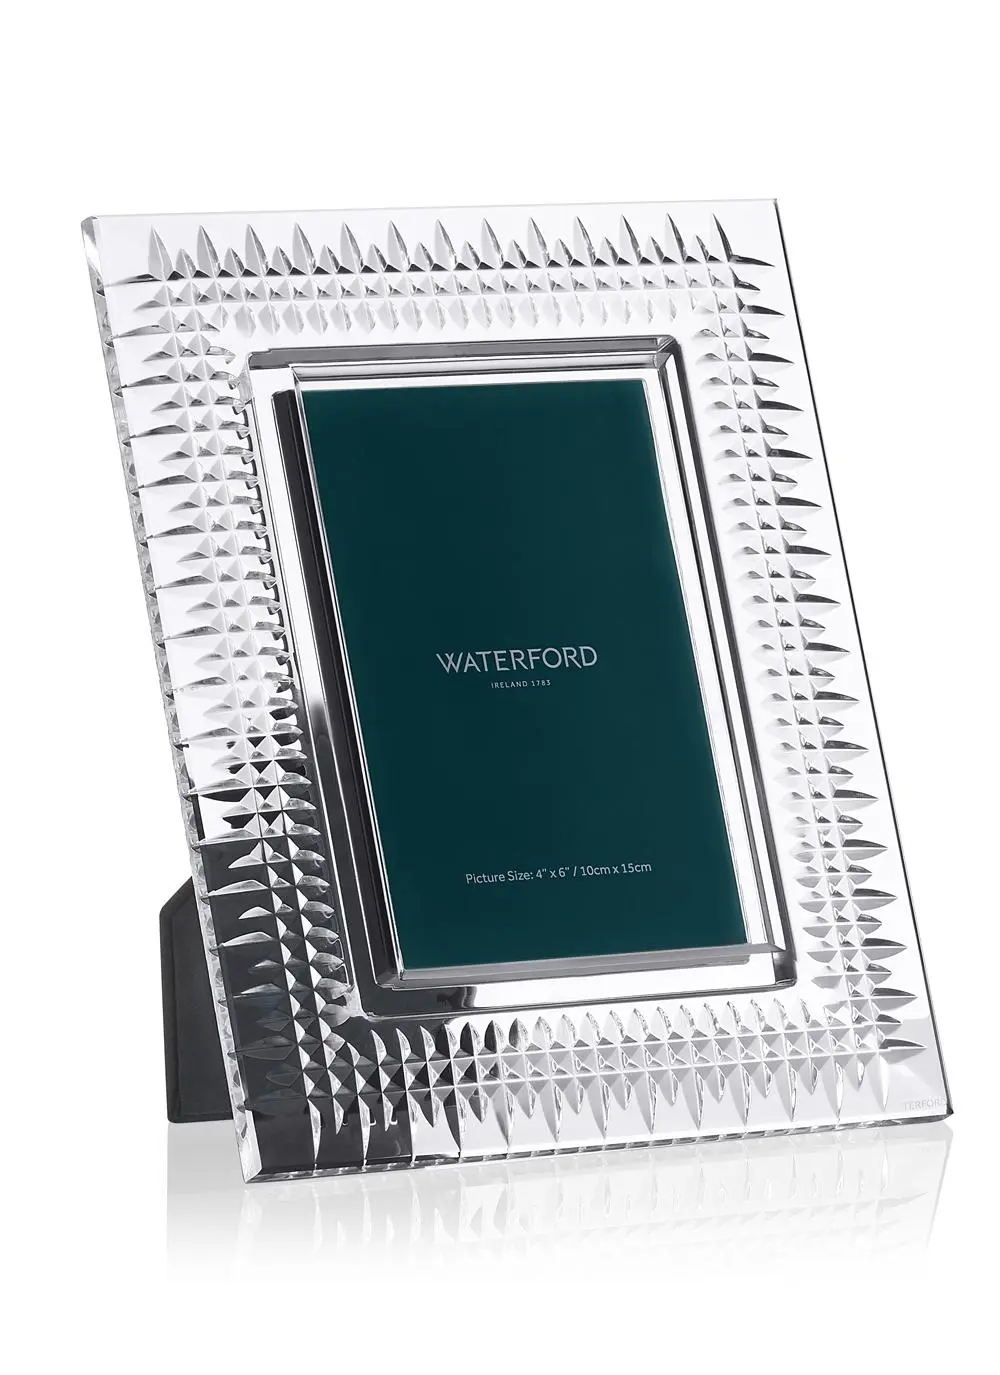 Waterford Crystal Lismore Diamond Frame (4 x 6 inches)